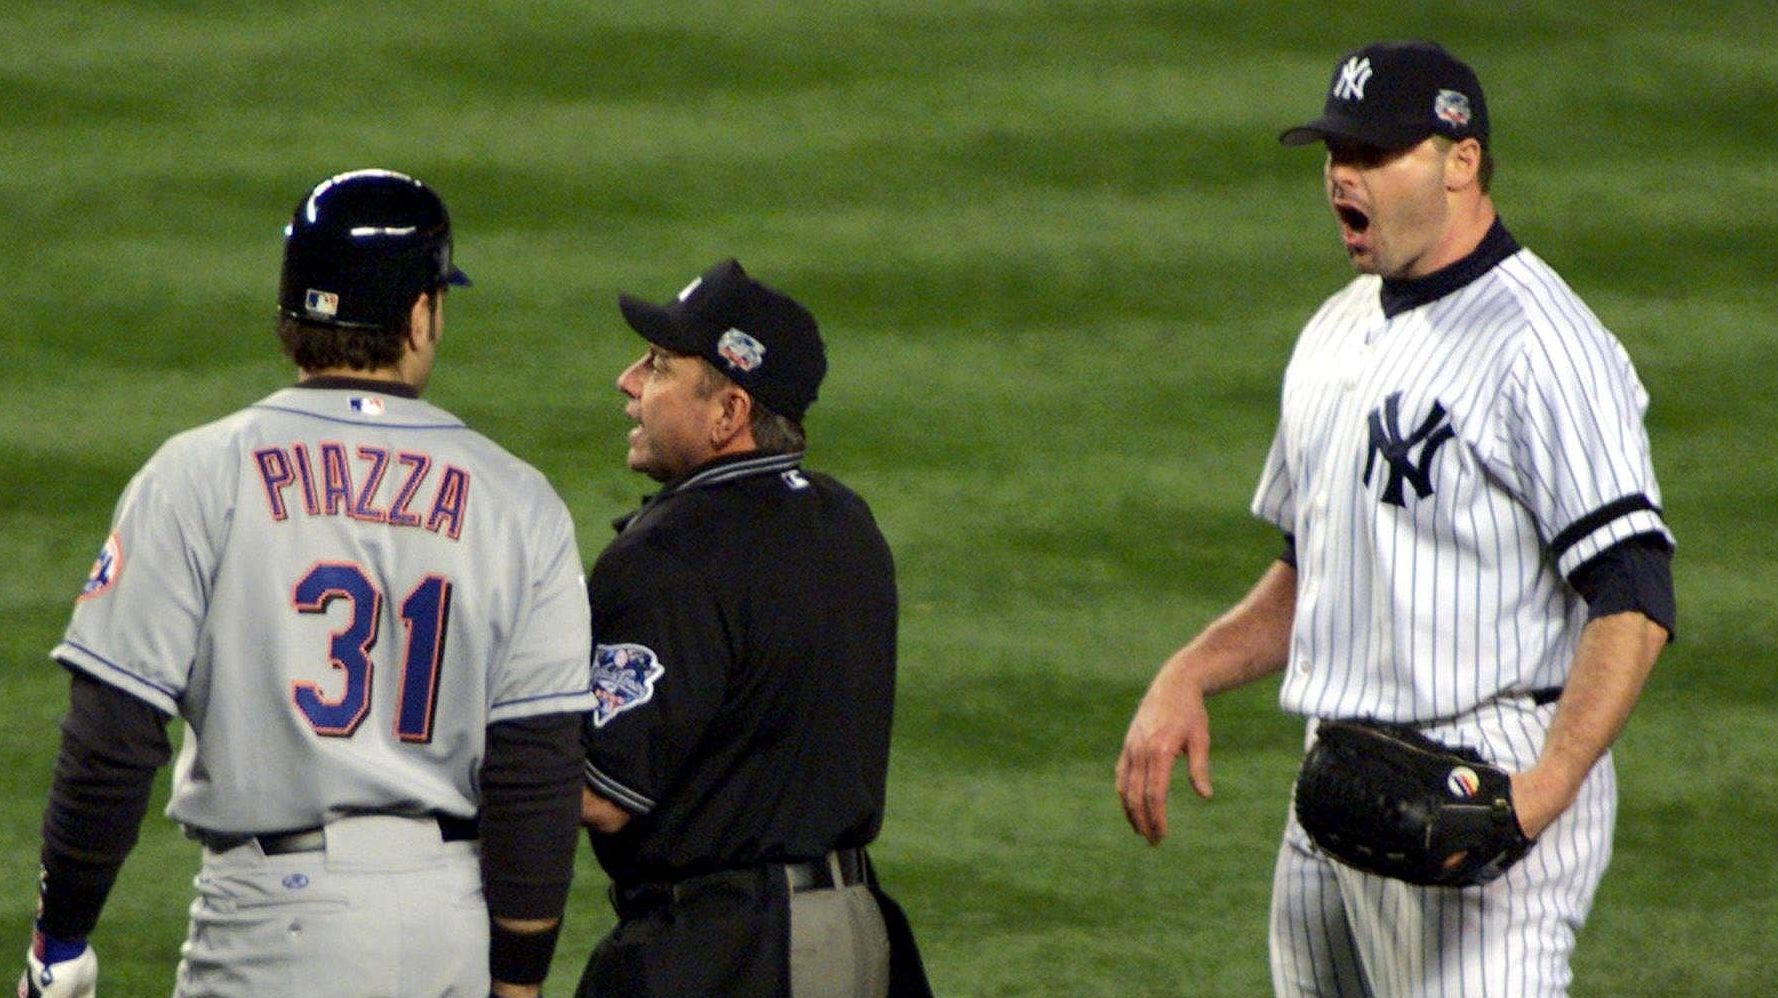 Mike Piazza's wife throws some high heat at Roger Clemens over